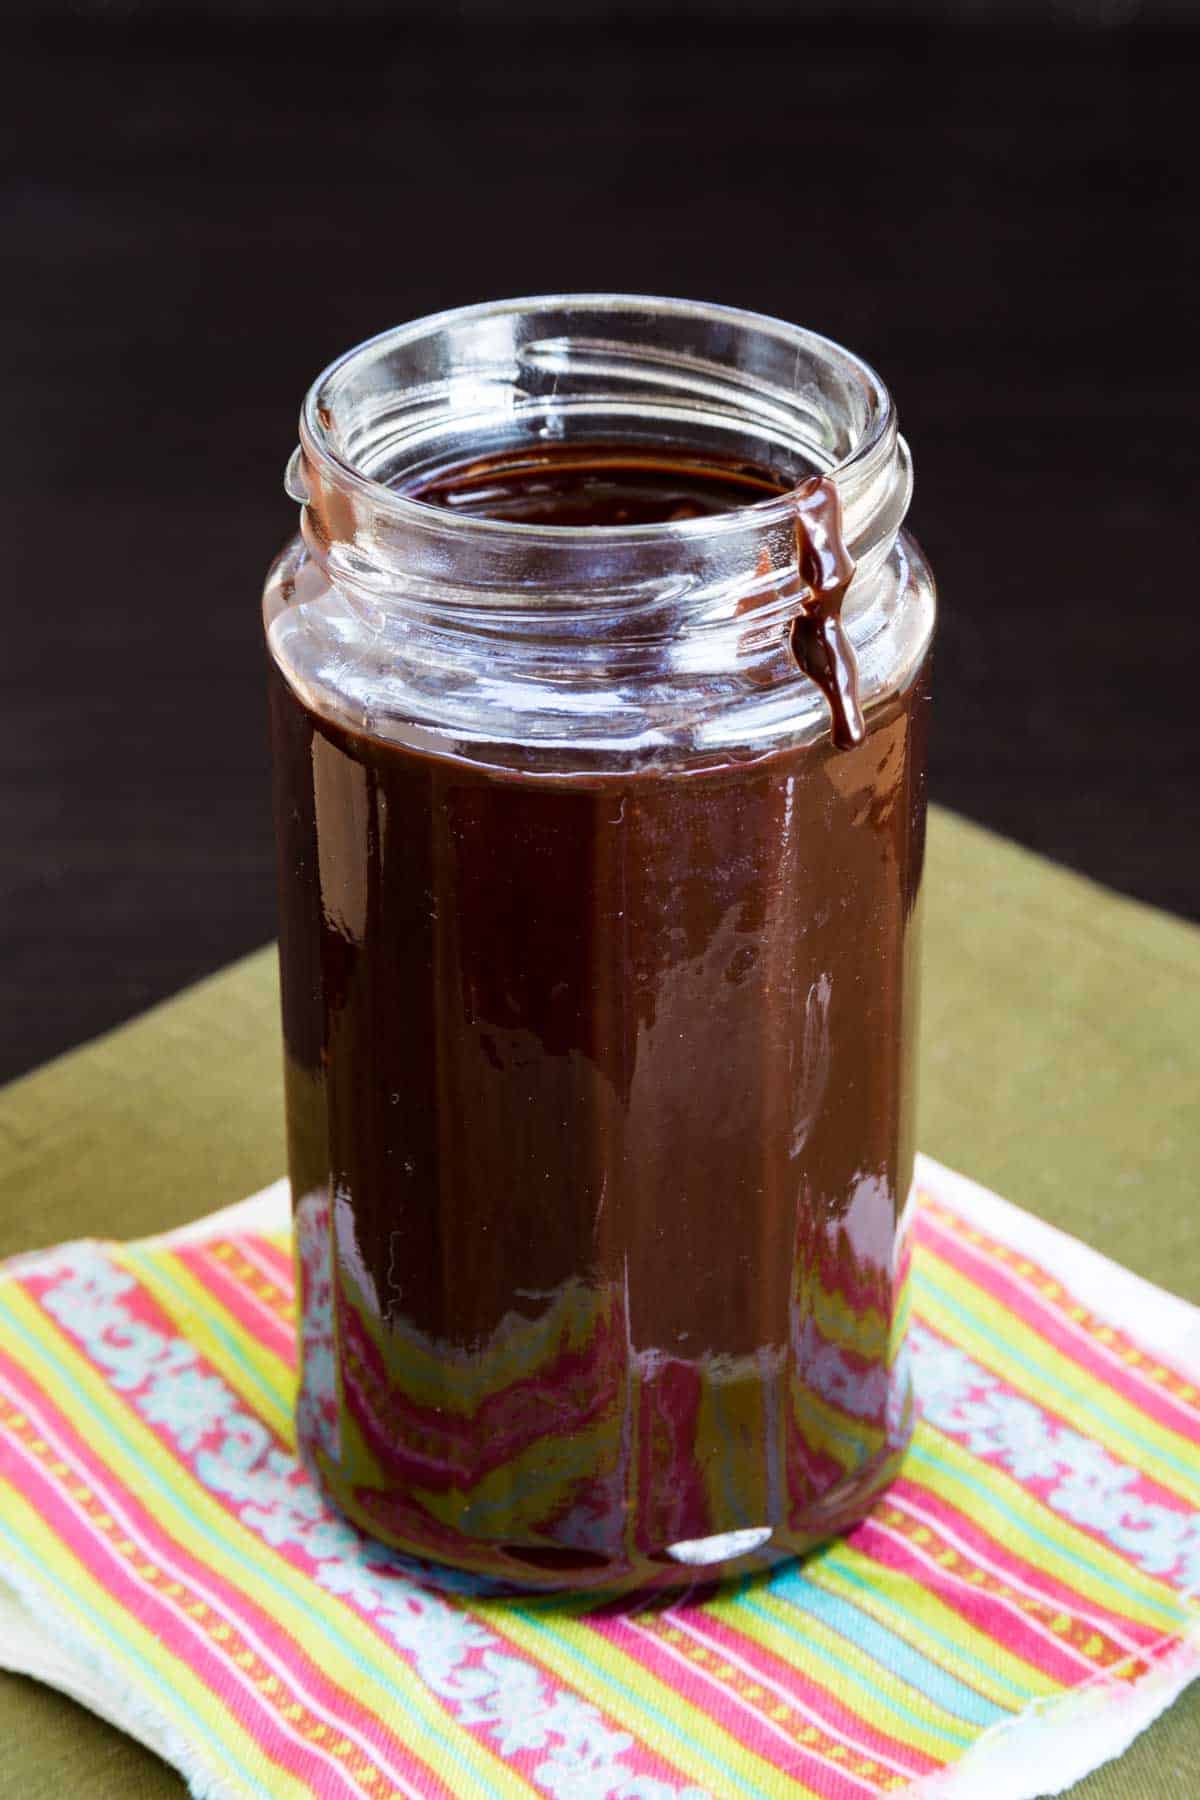 A jar of fudge sauce with a small drip on the lip of the jar.